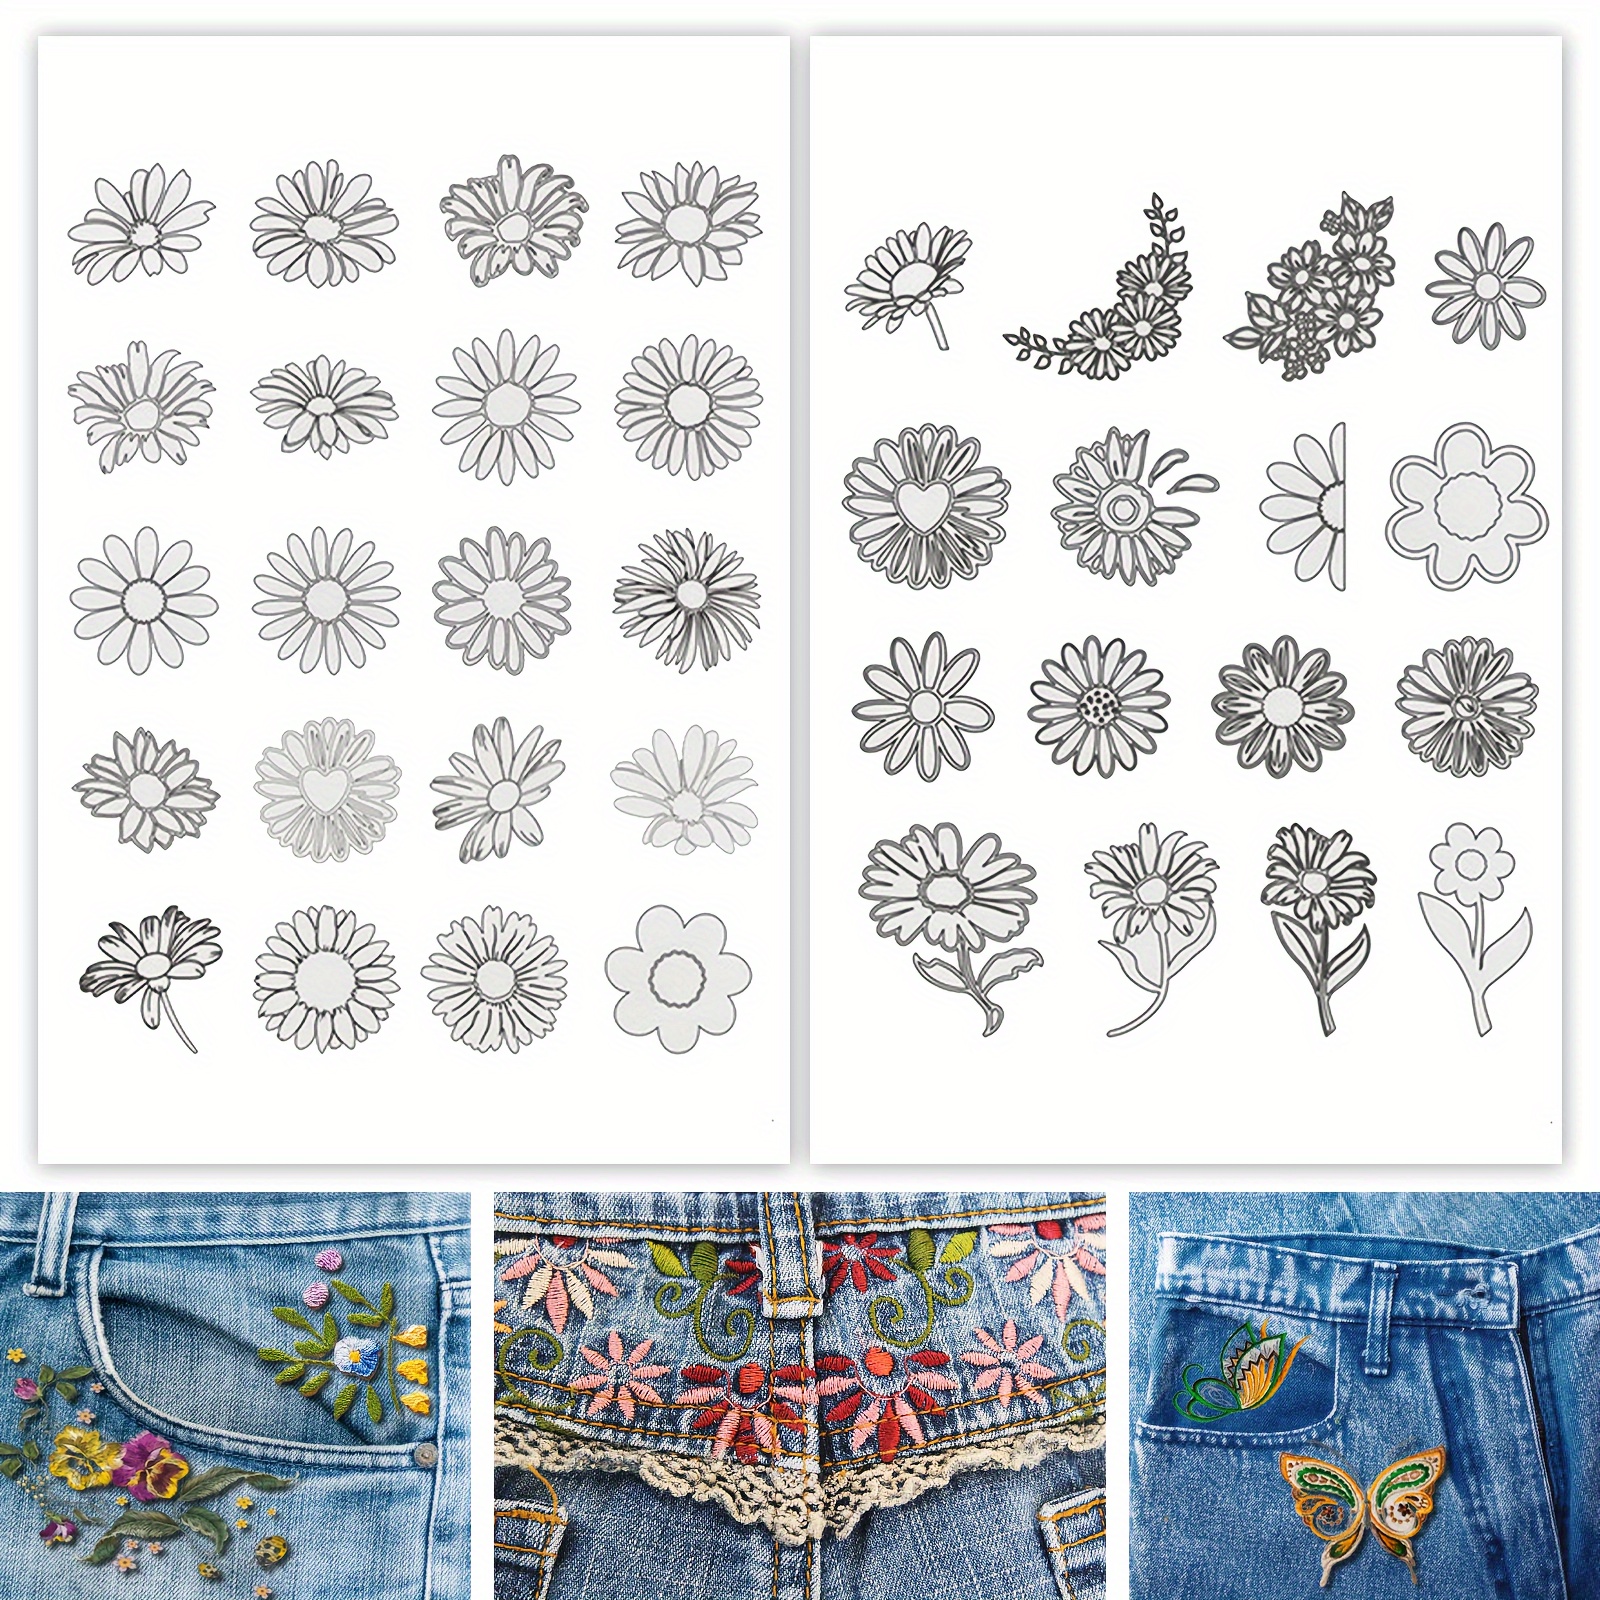  Jutom 10 Pcs Large Embroidery Patterns Water Soluble